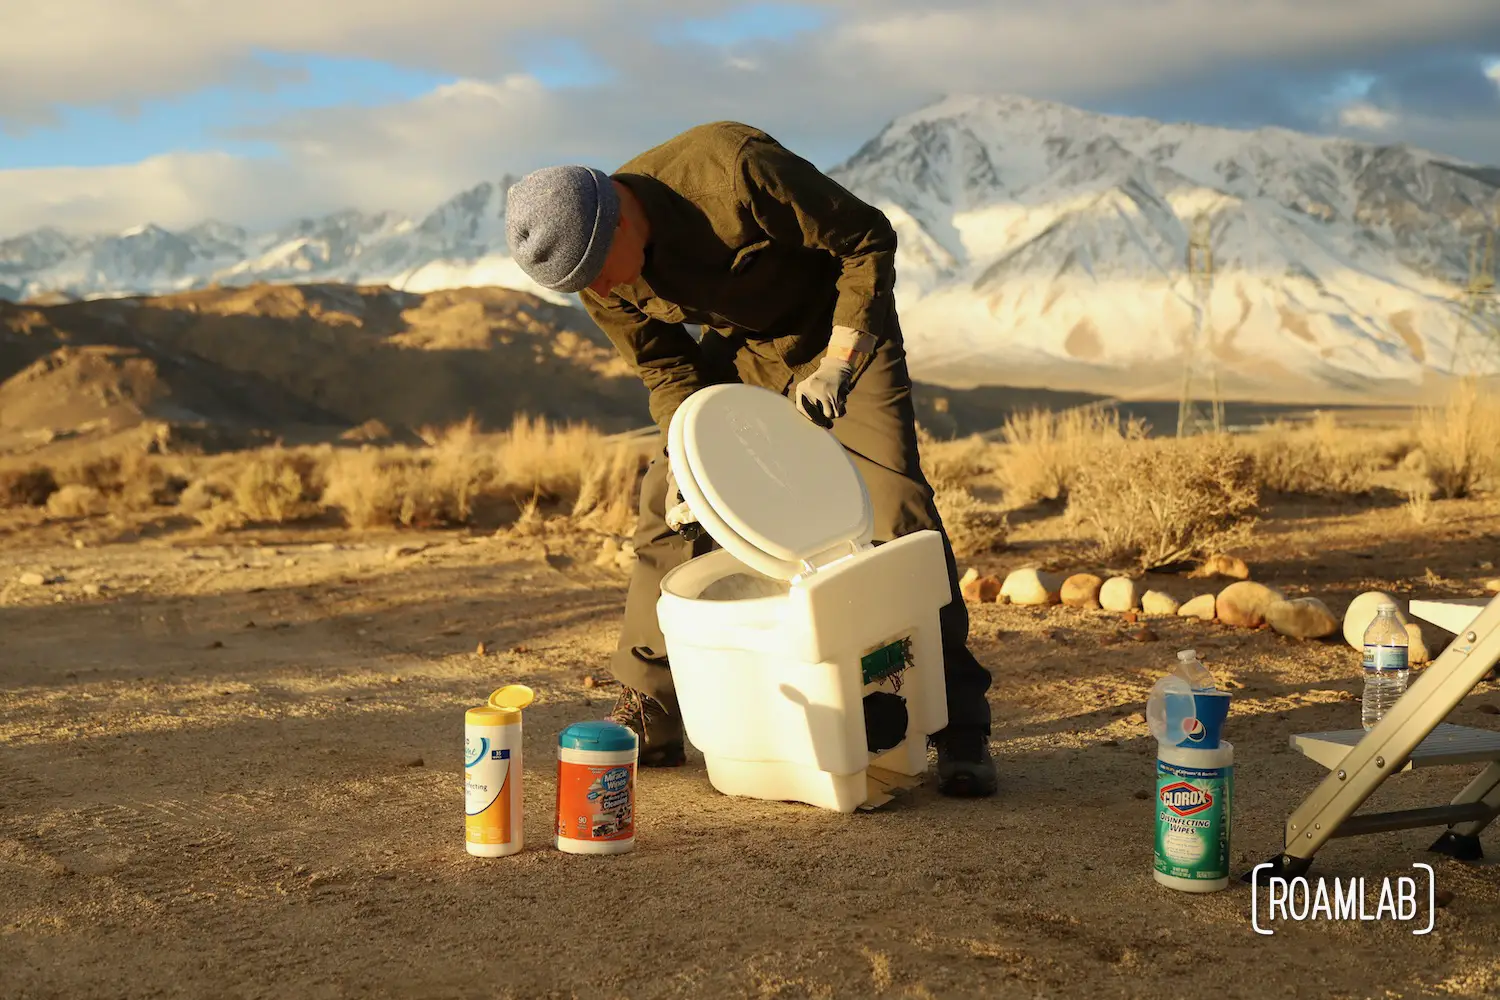 Man cleaning a dry flush toilet with the Sierra Nevada in the background.